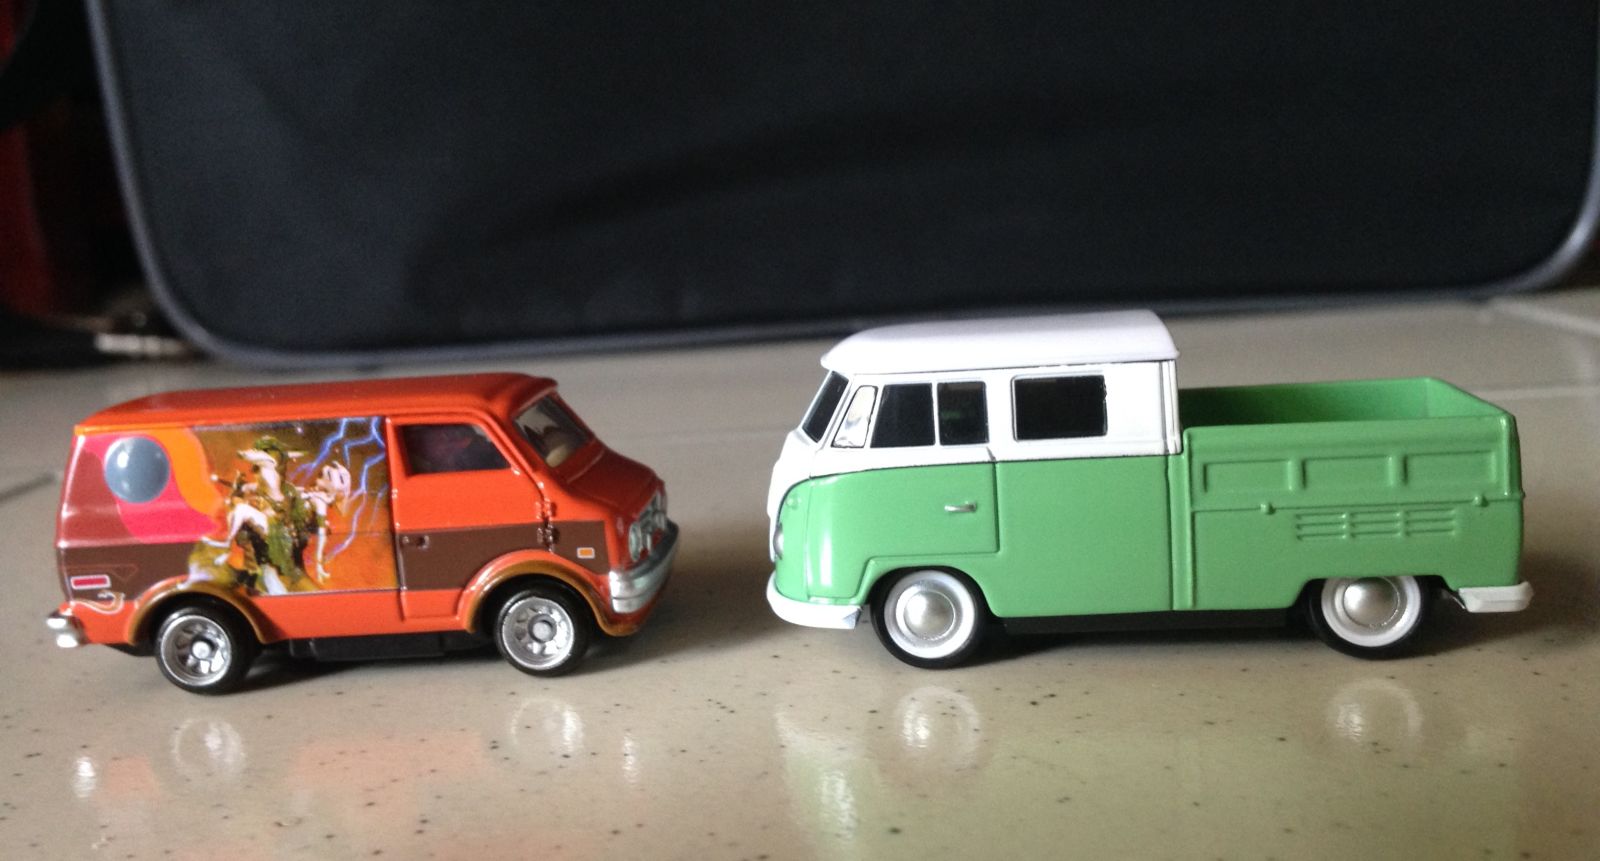 Using the VW Type 2 pick up as size reference